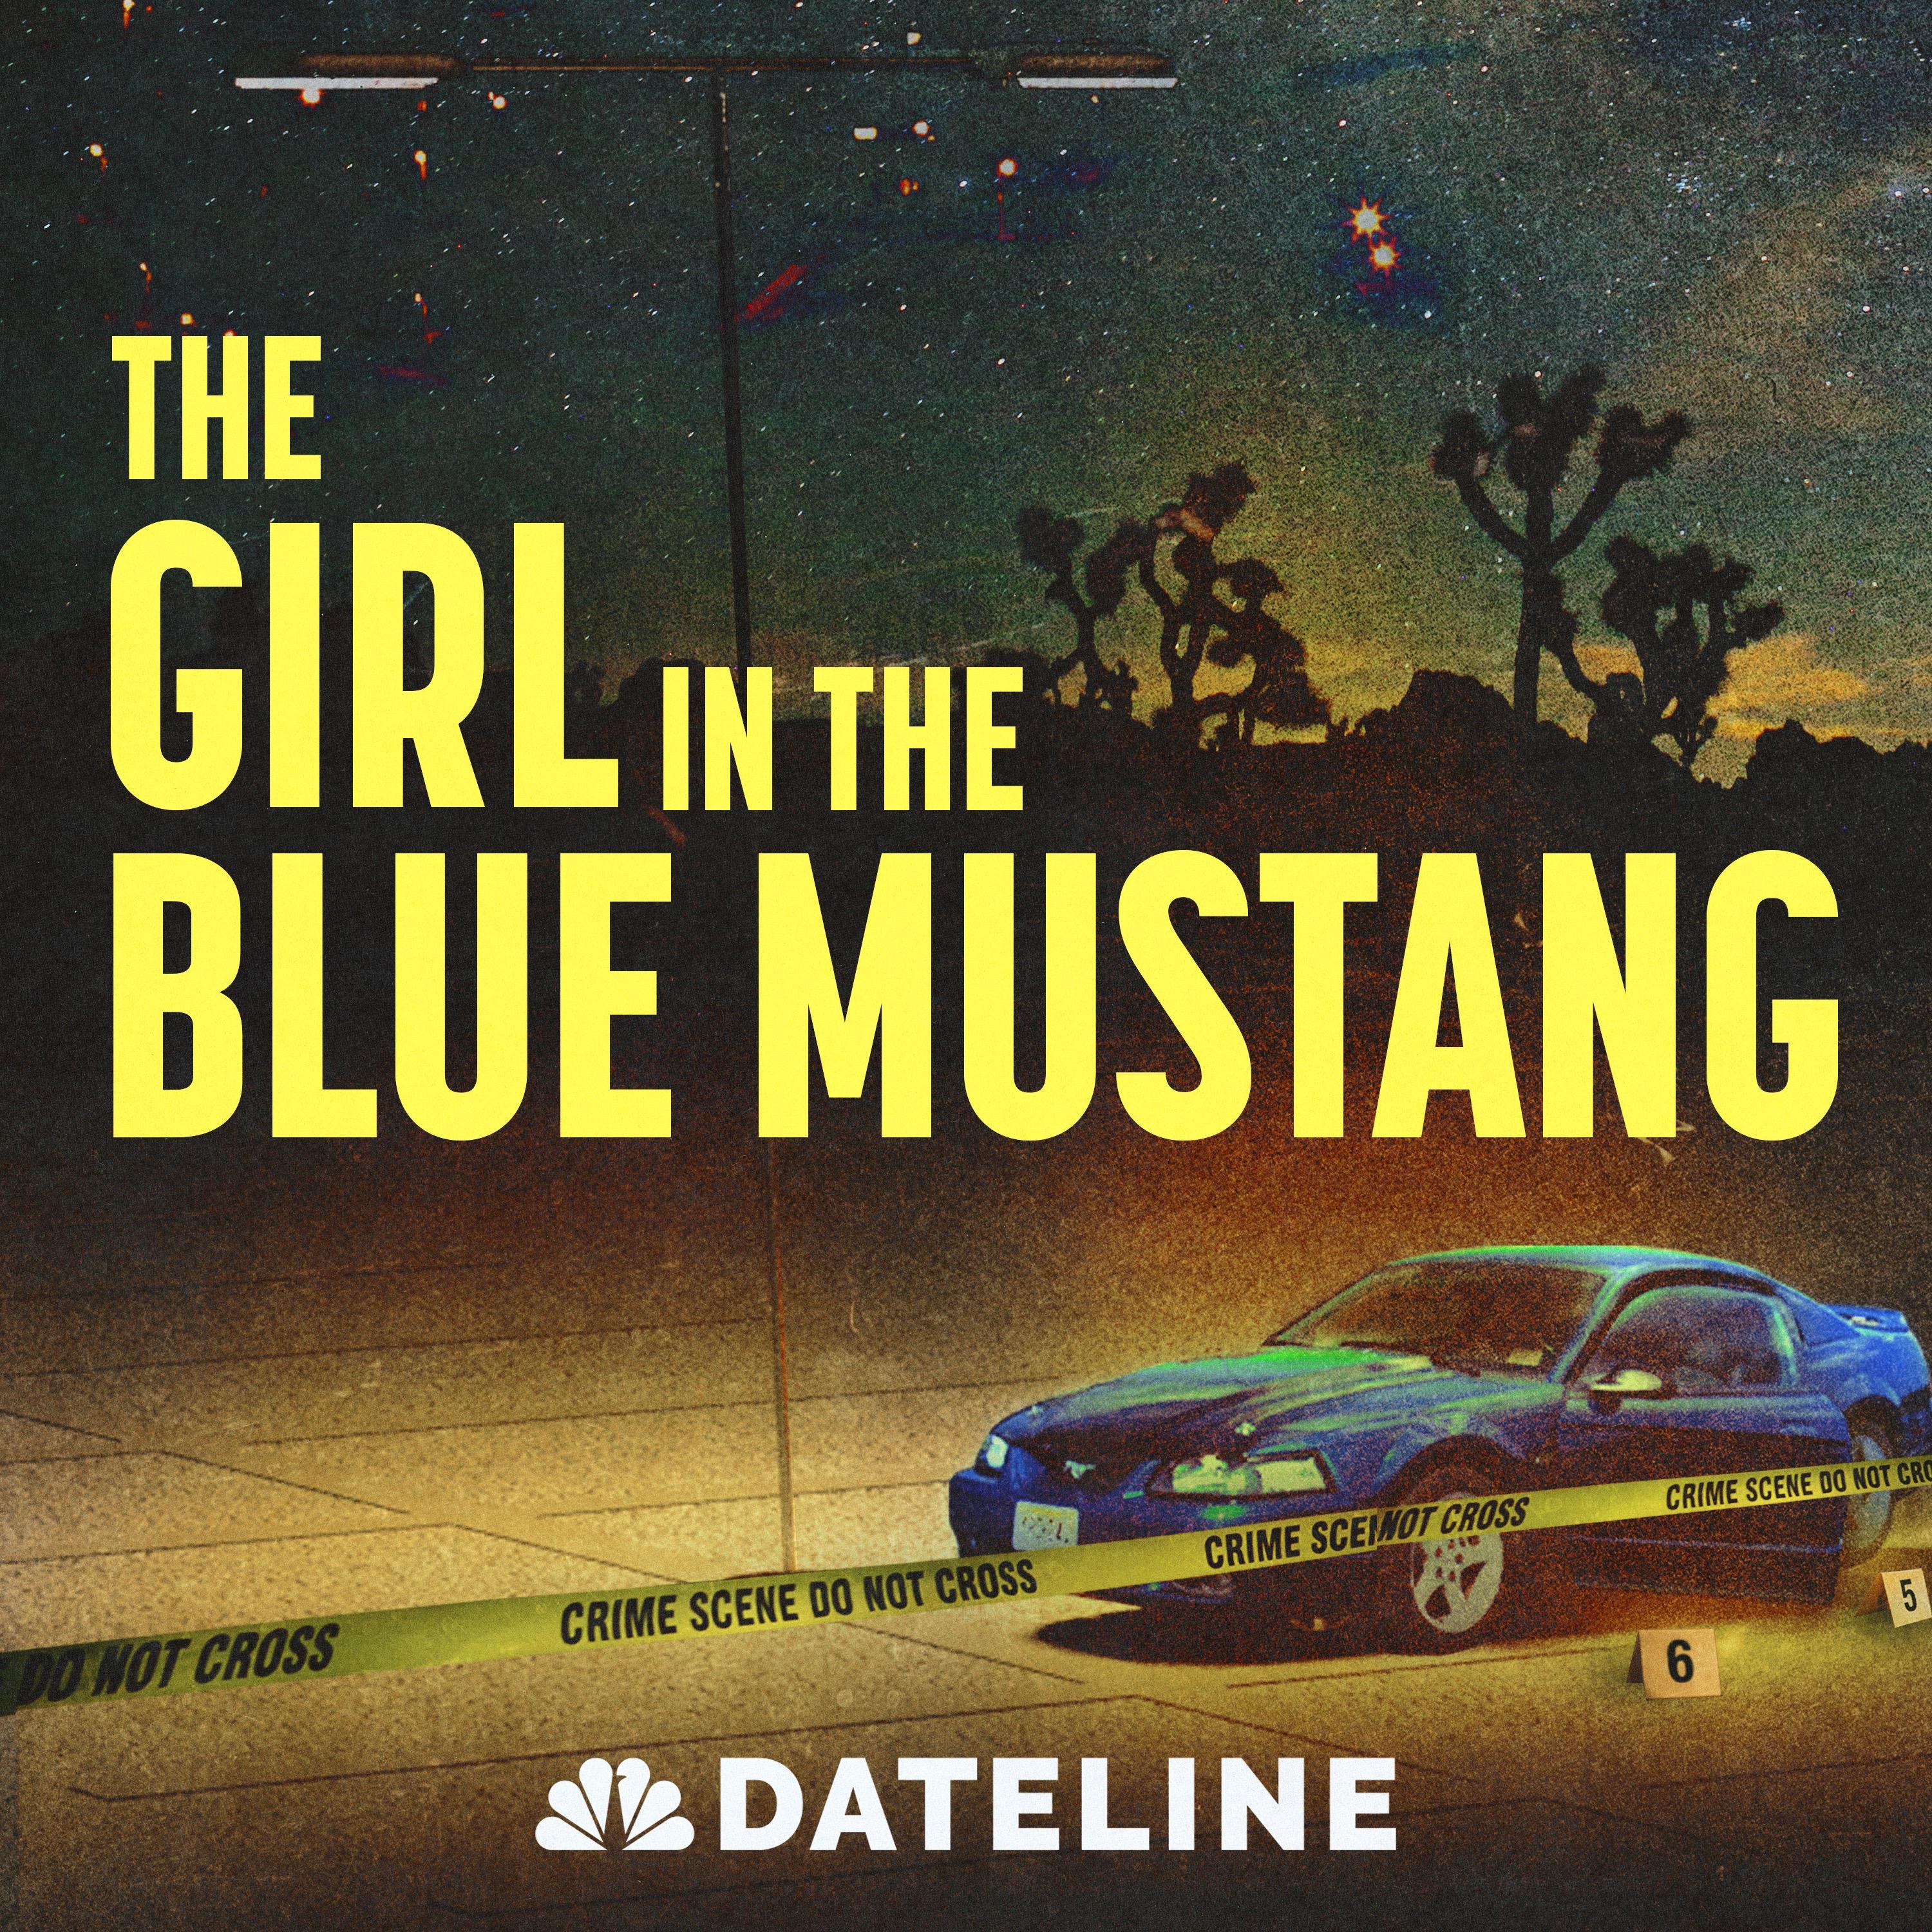 Show poster of The Girl in the Blue Mustang